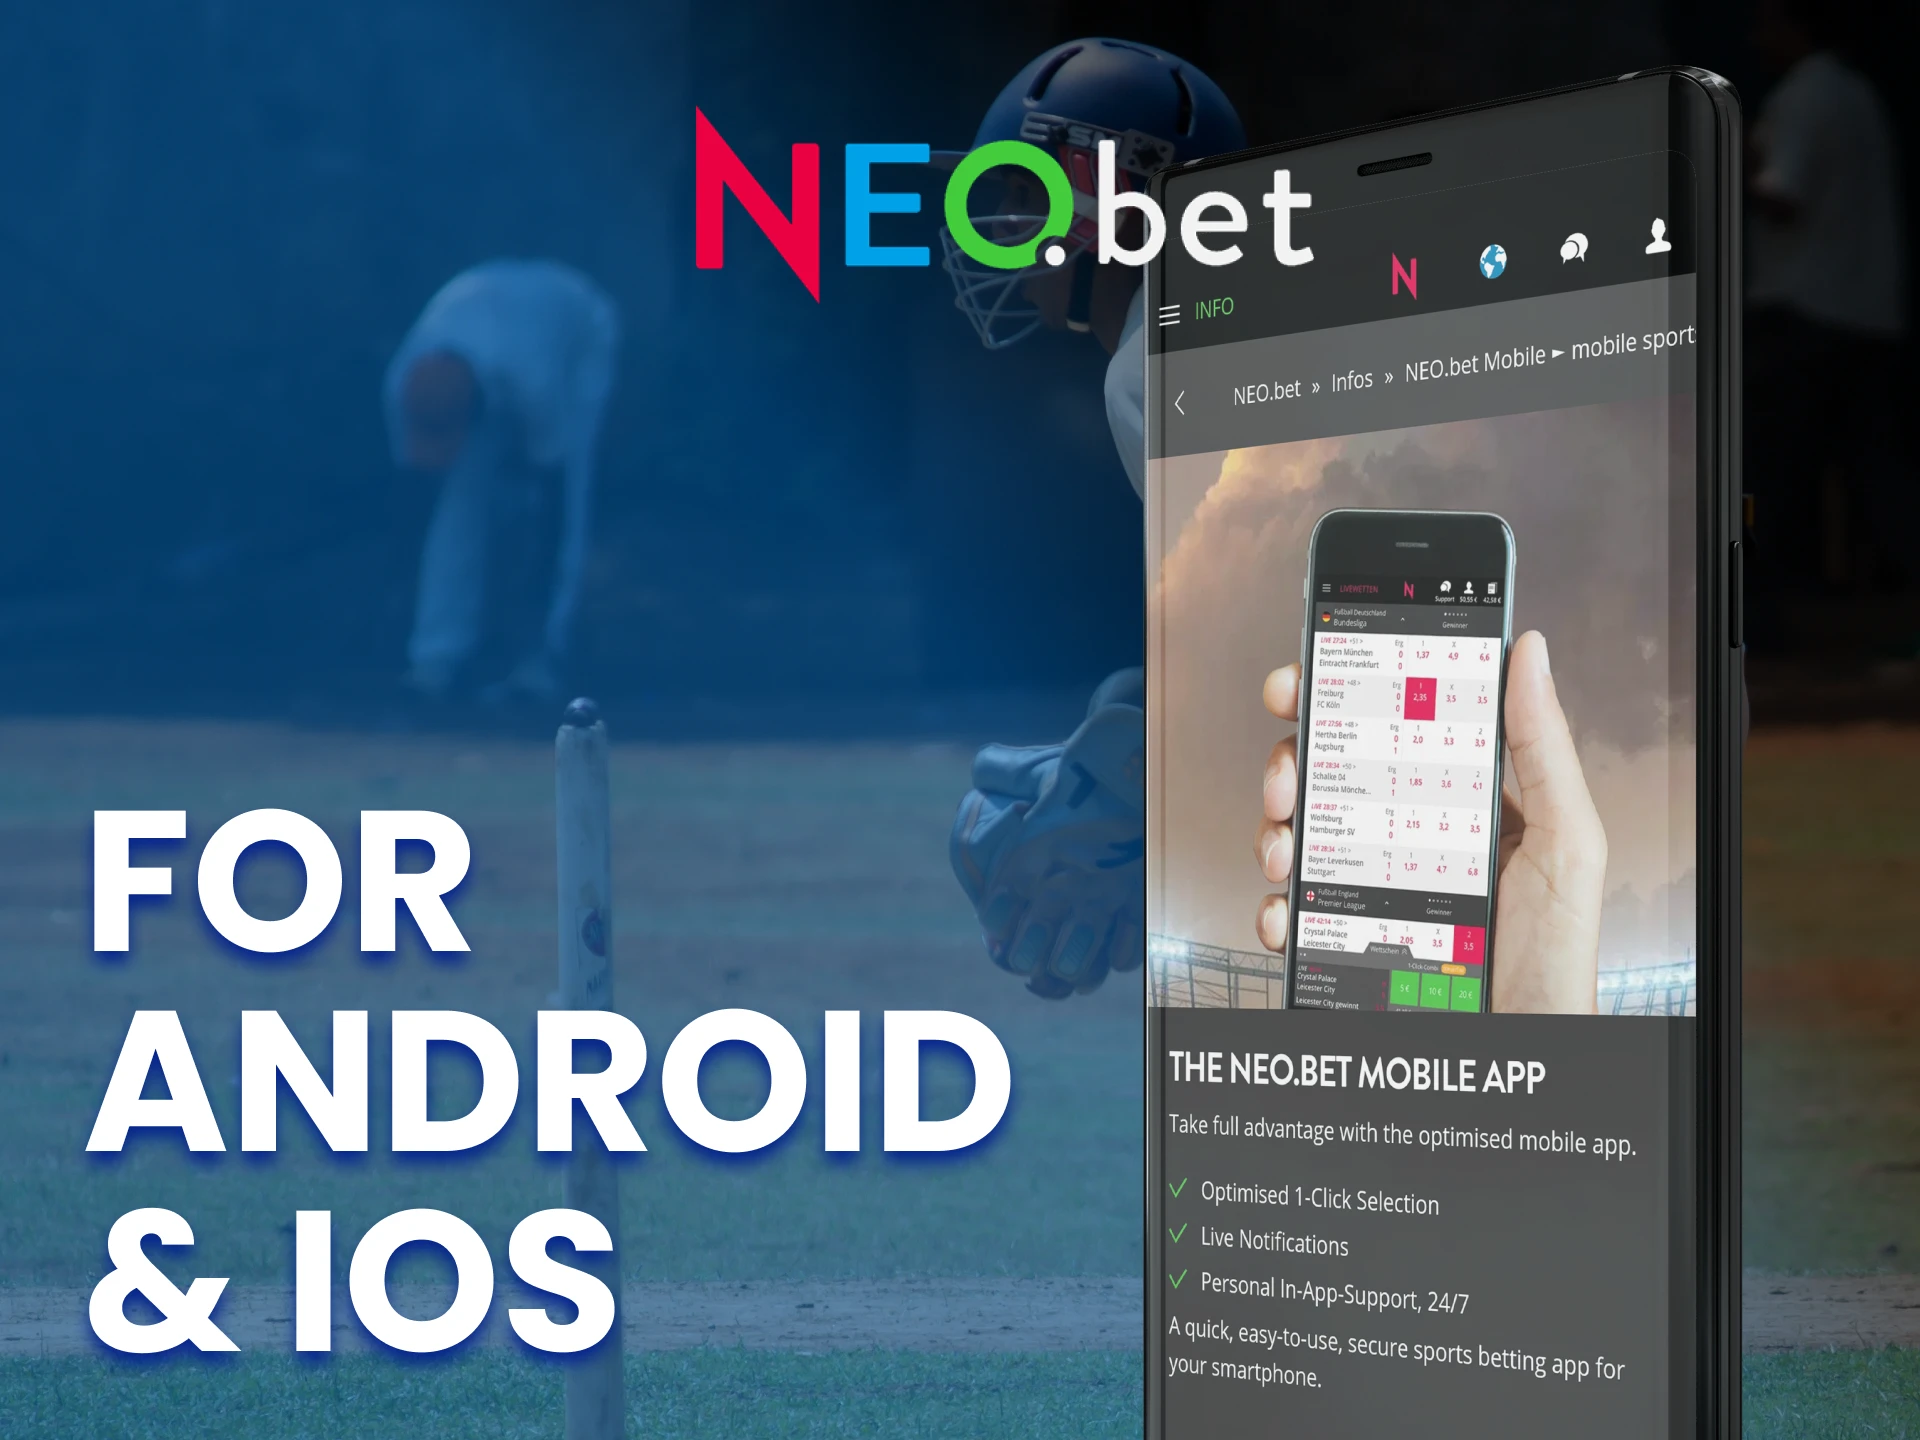 You can install NEO.bet on your Android or iOS device.